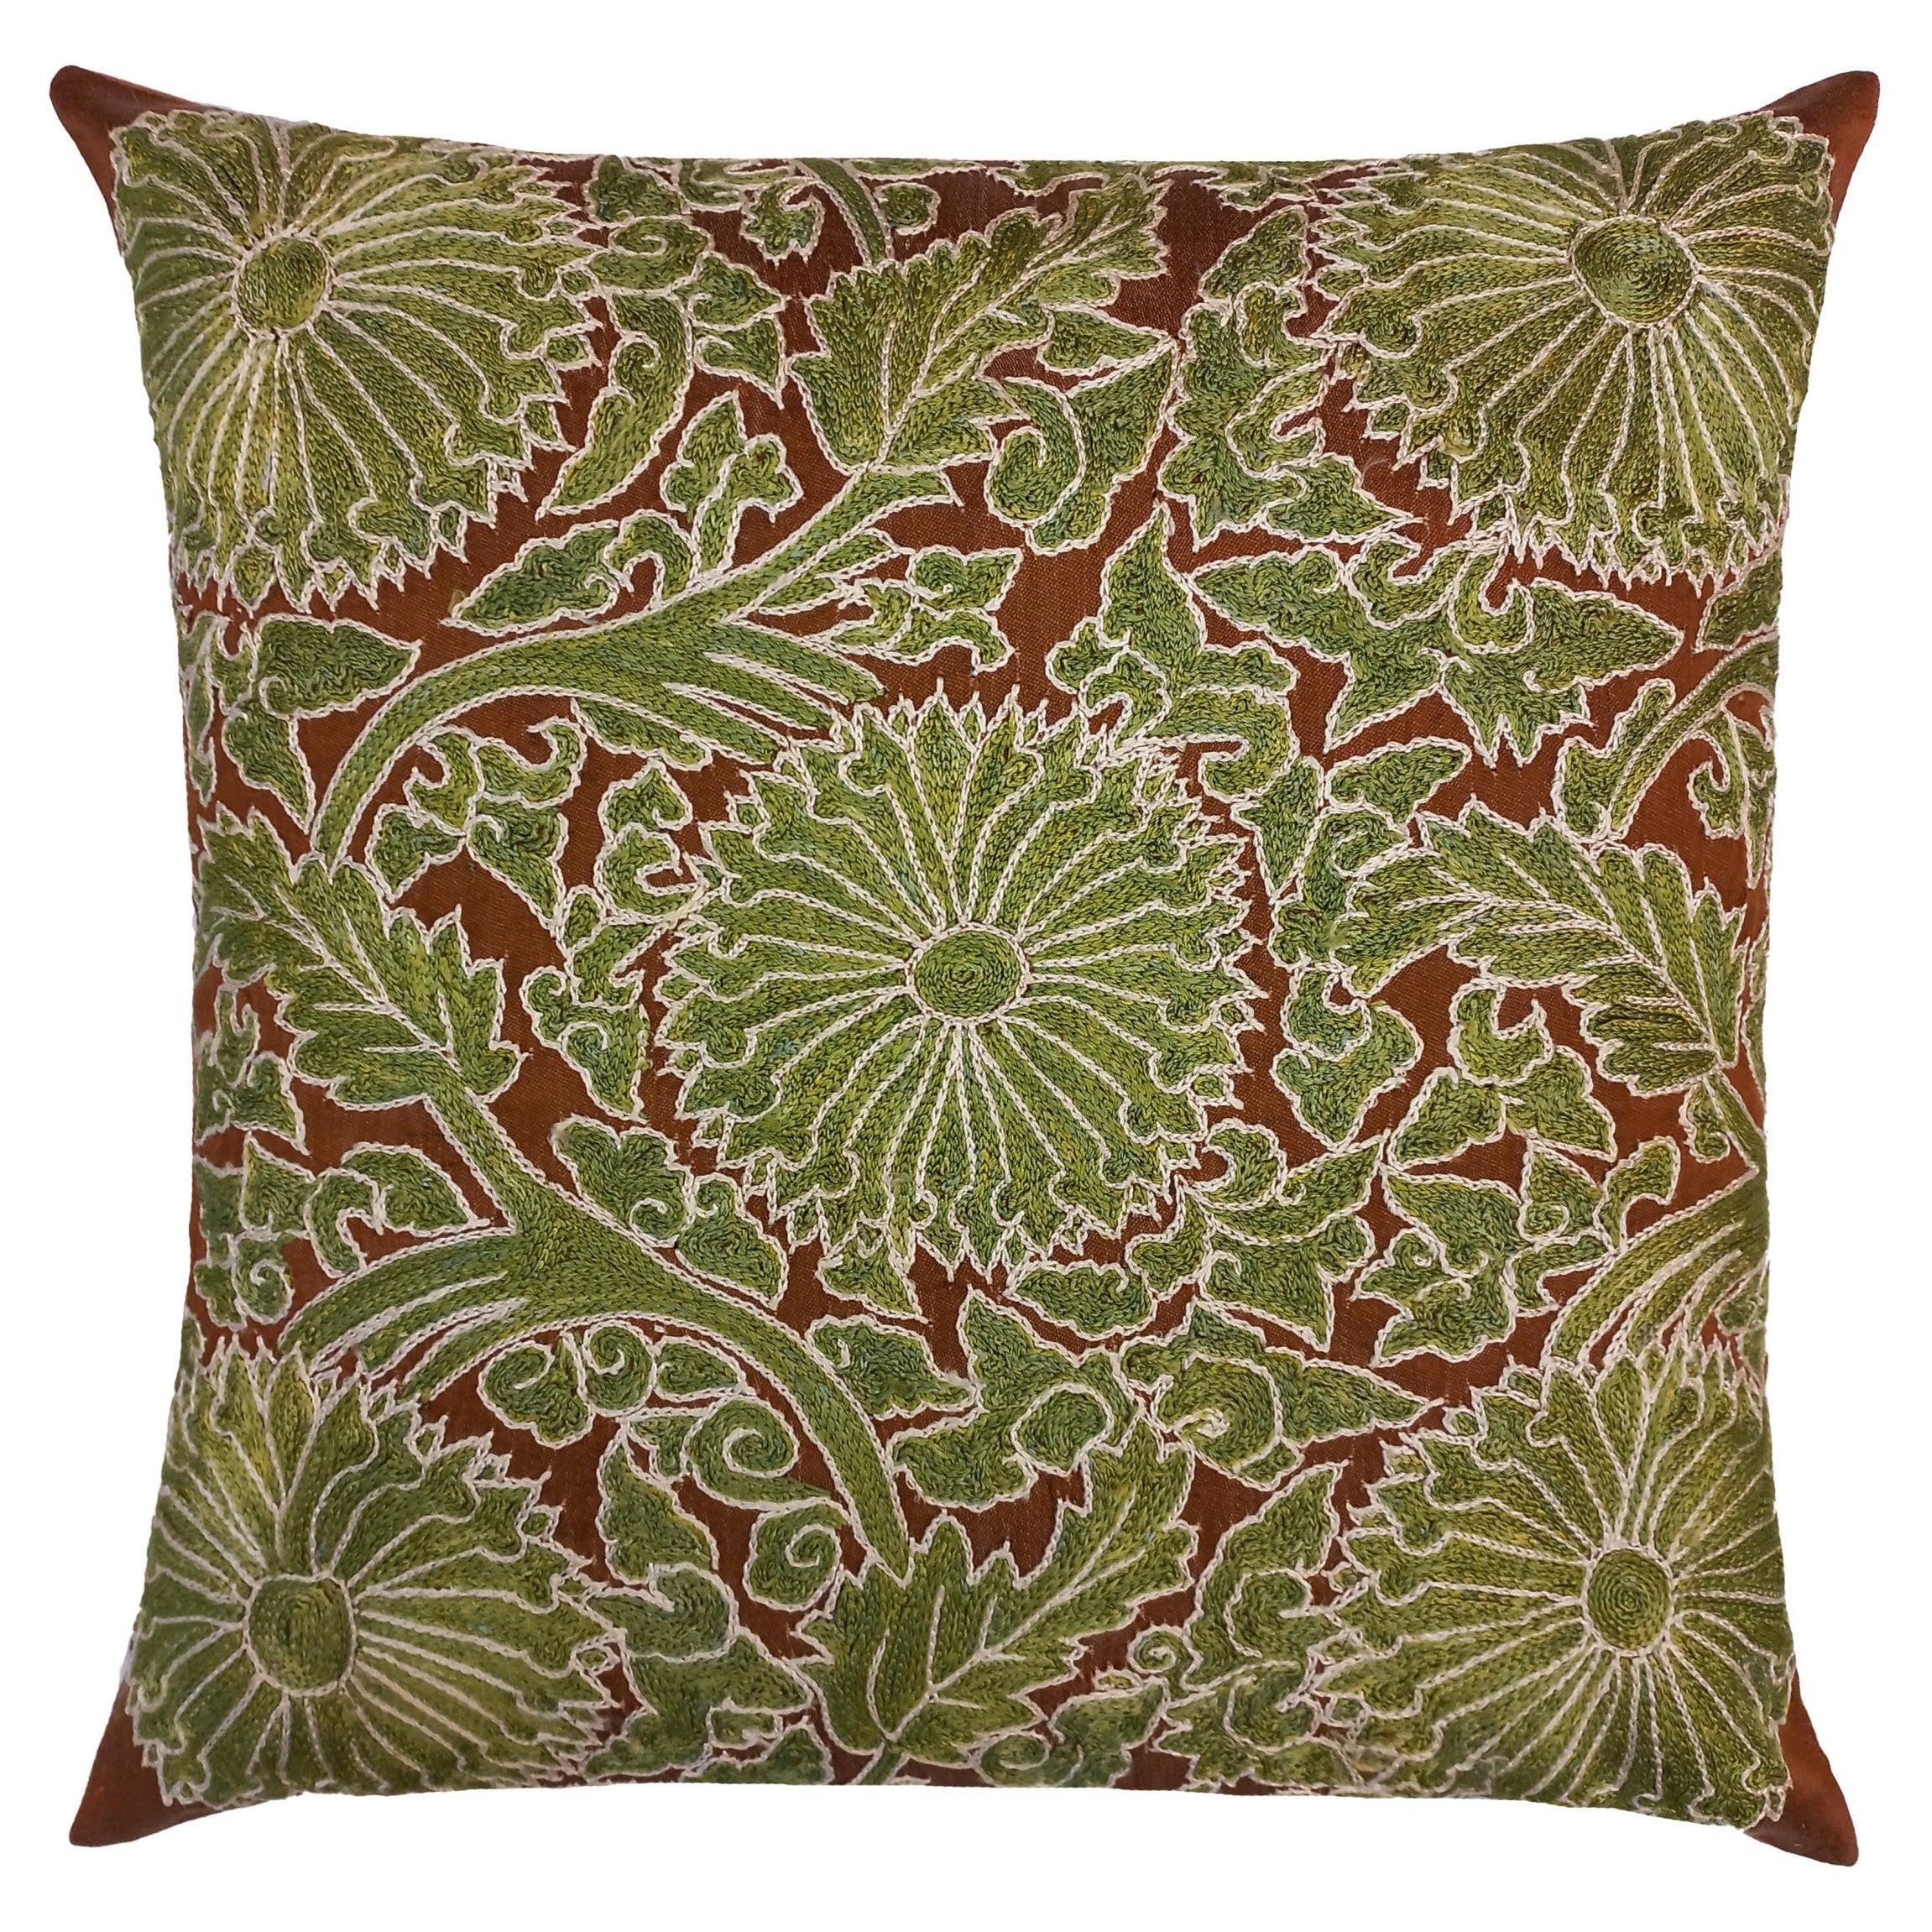 19"x19" Uzbek Suzani Cushion Cover Made of Silk, Hand Embroidered Brown & Green For Sale